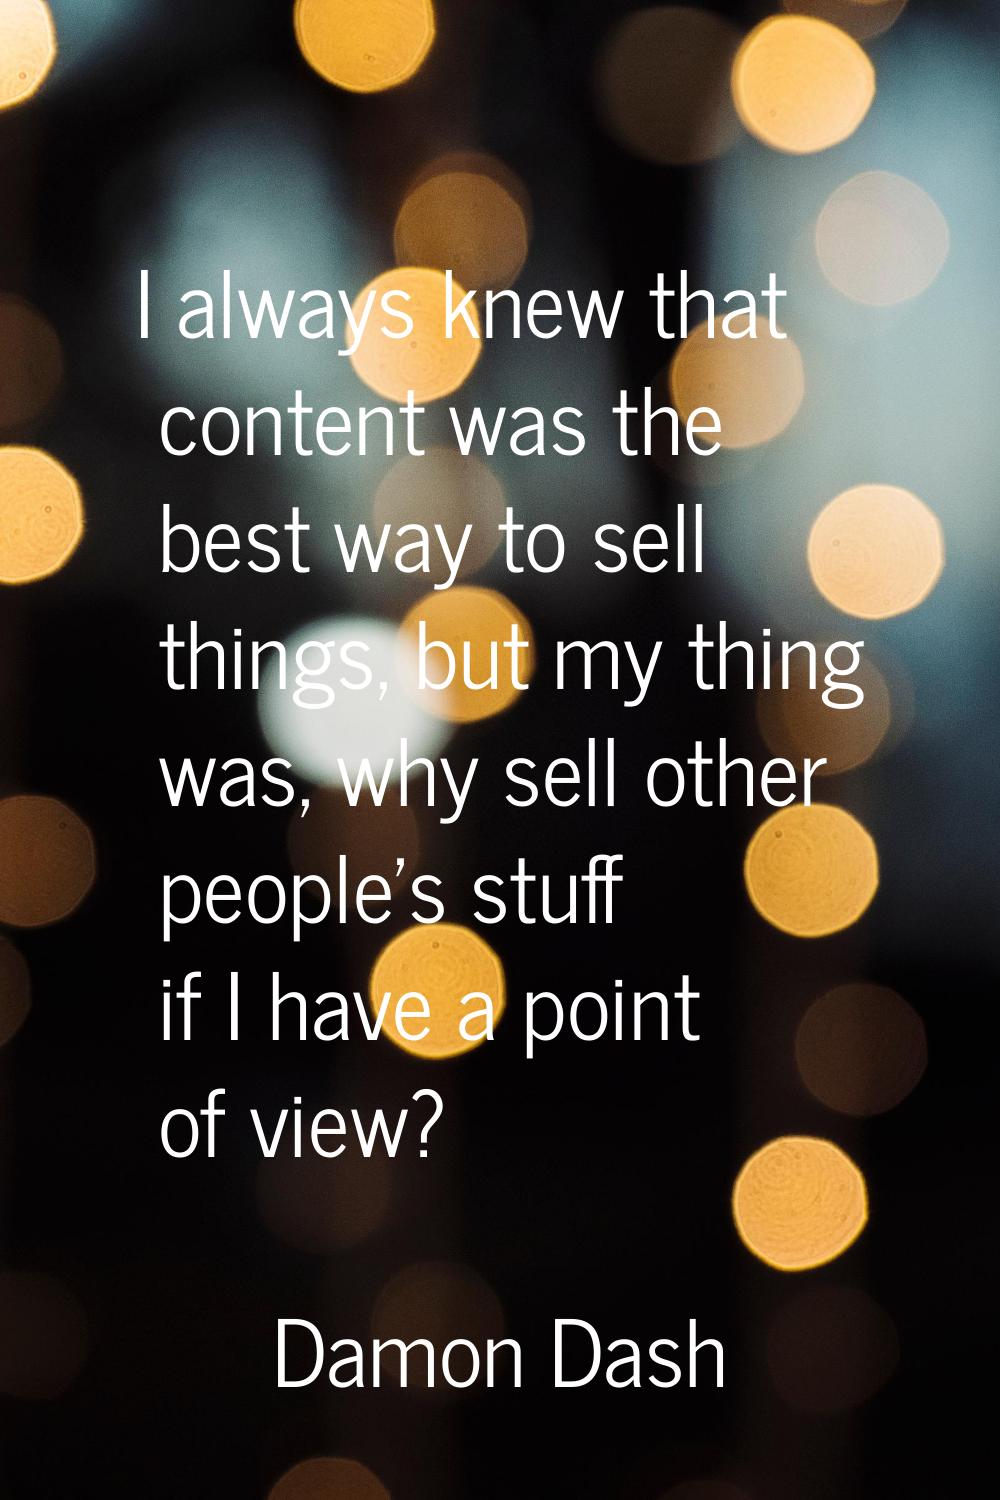 I always knew that content was the best way to sell things, but my thing was, why sell other people